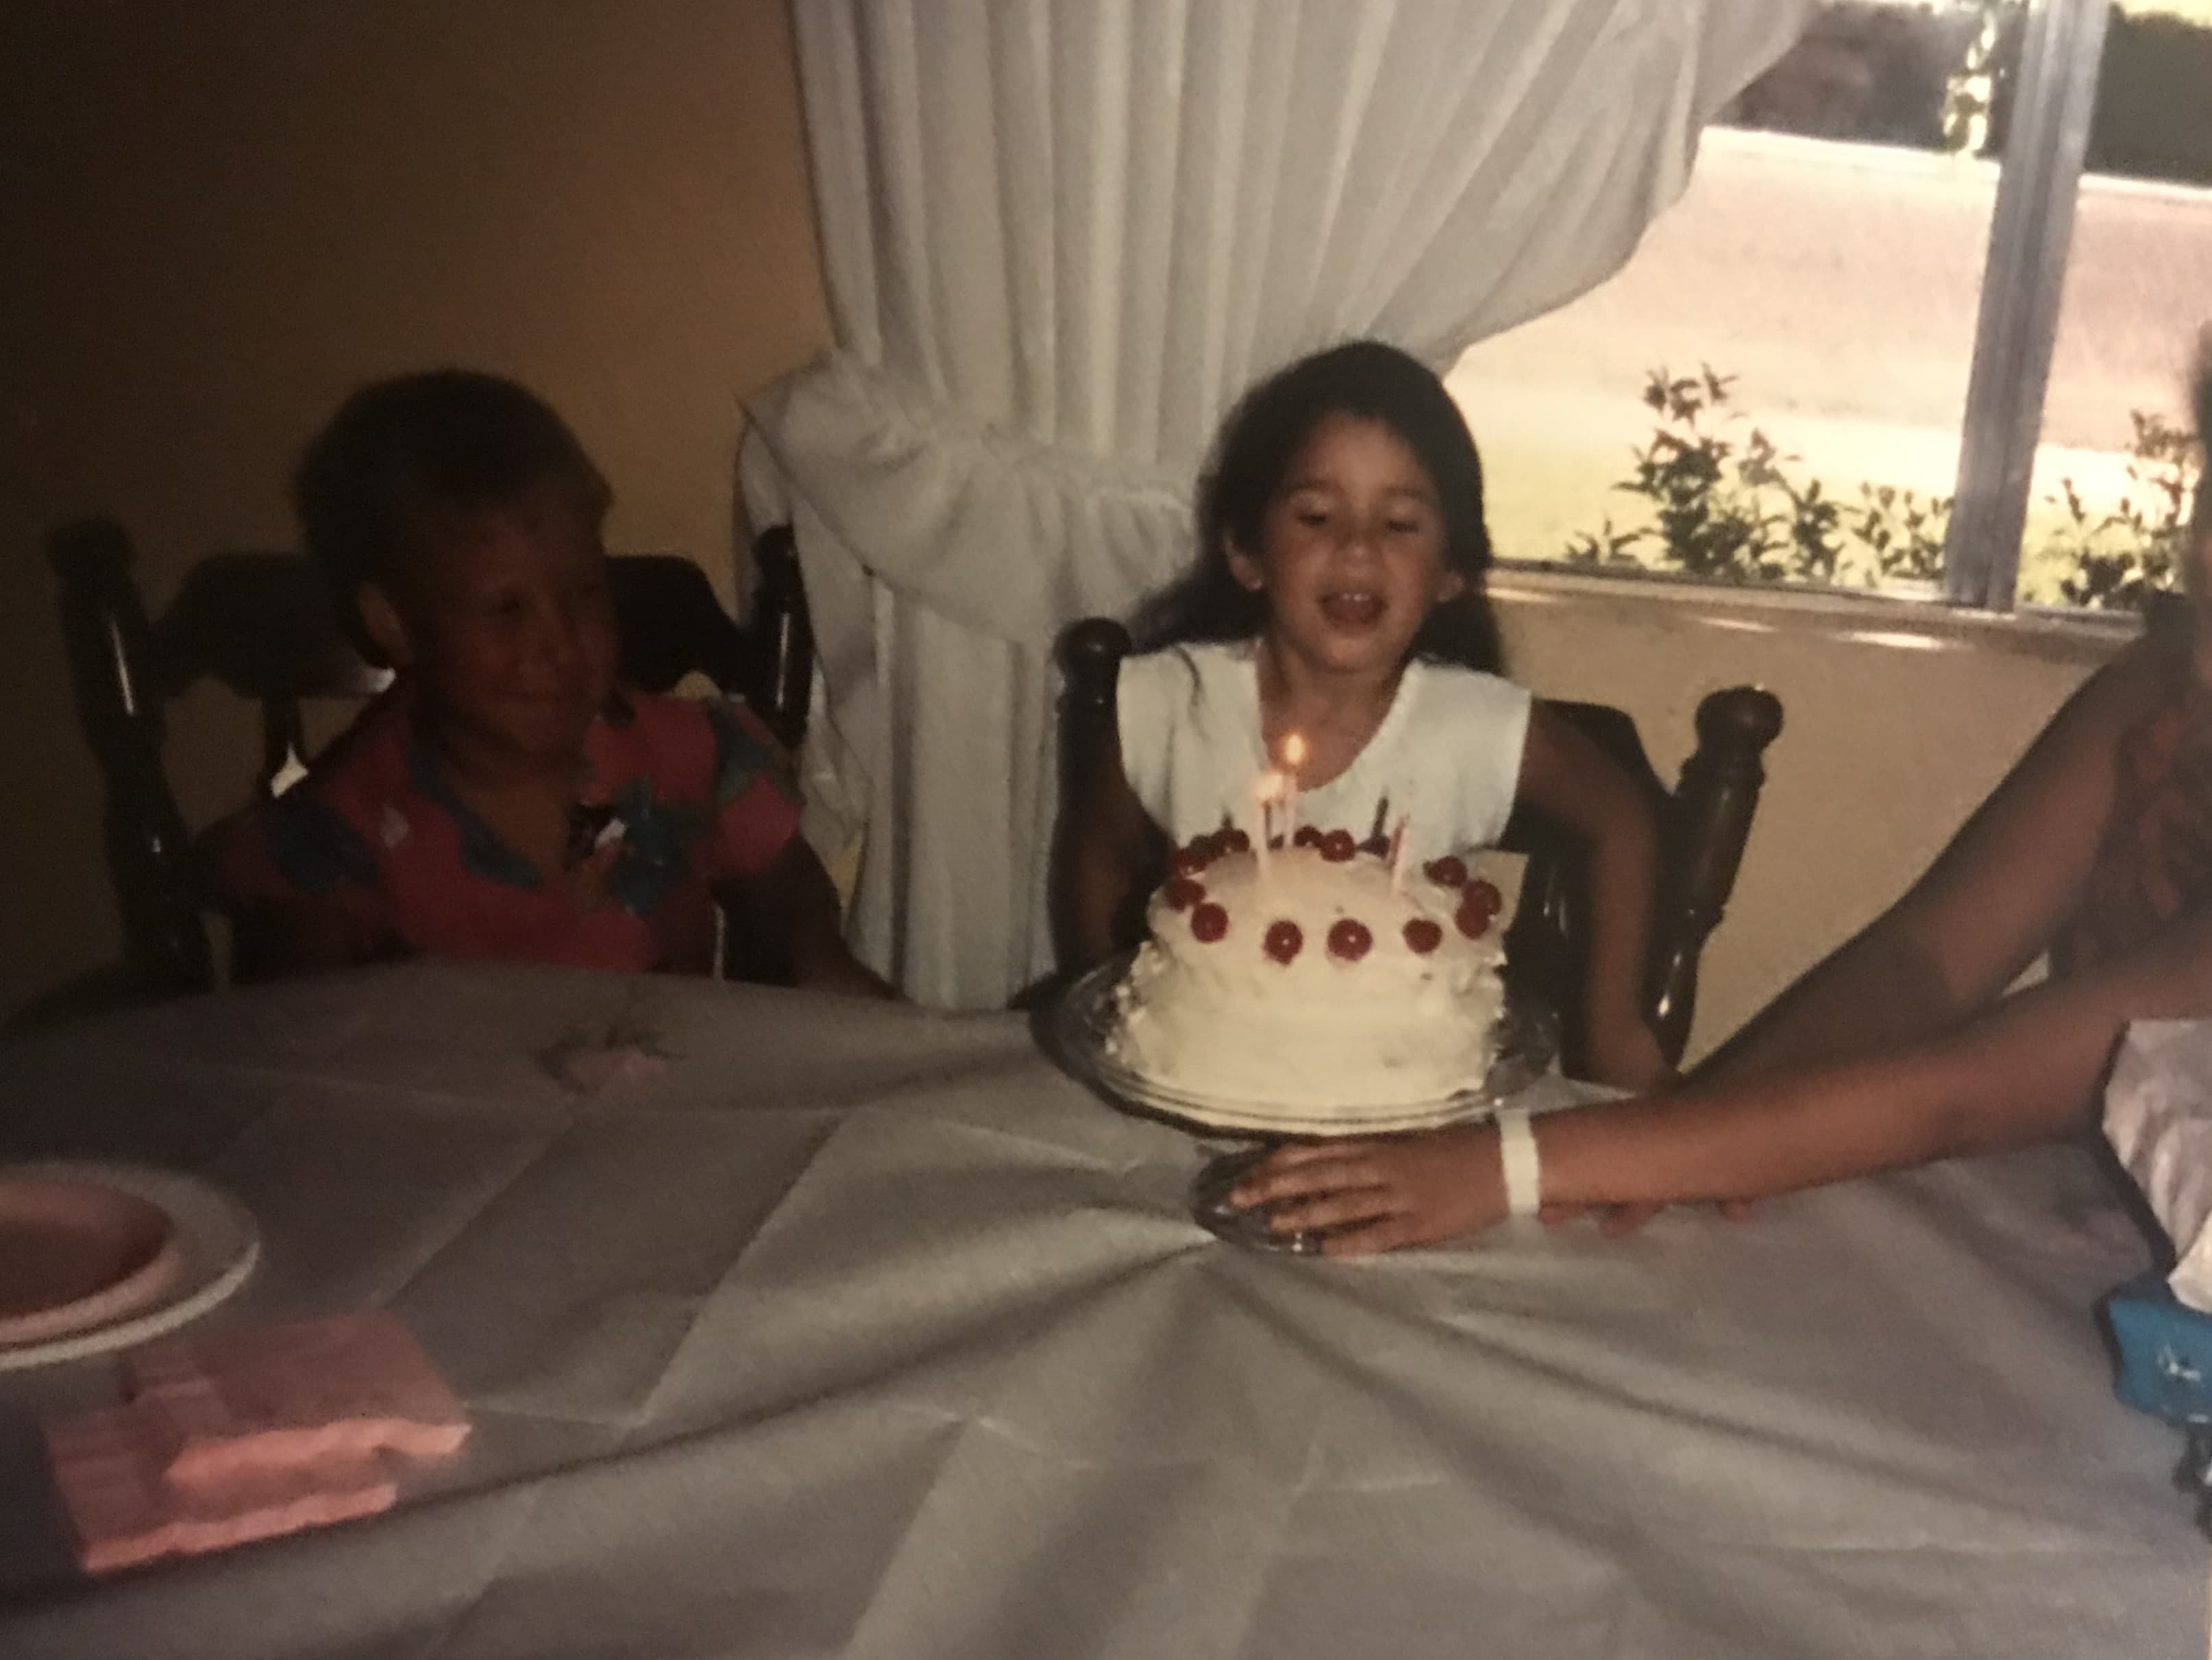 girl blowing out candles on cake